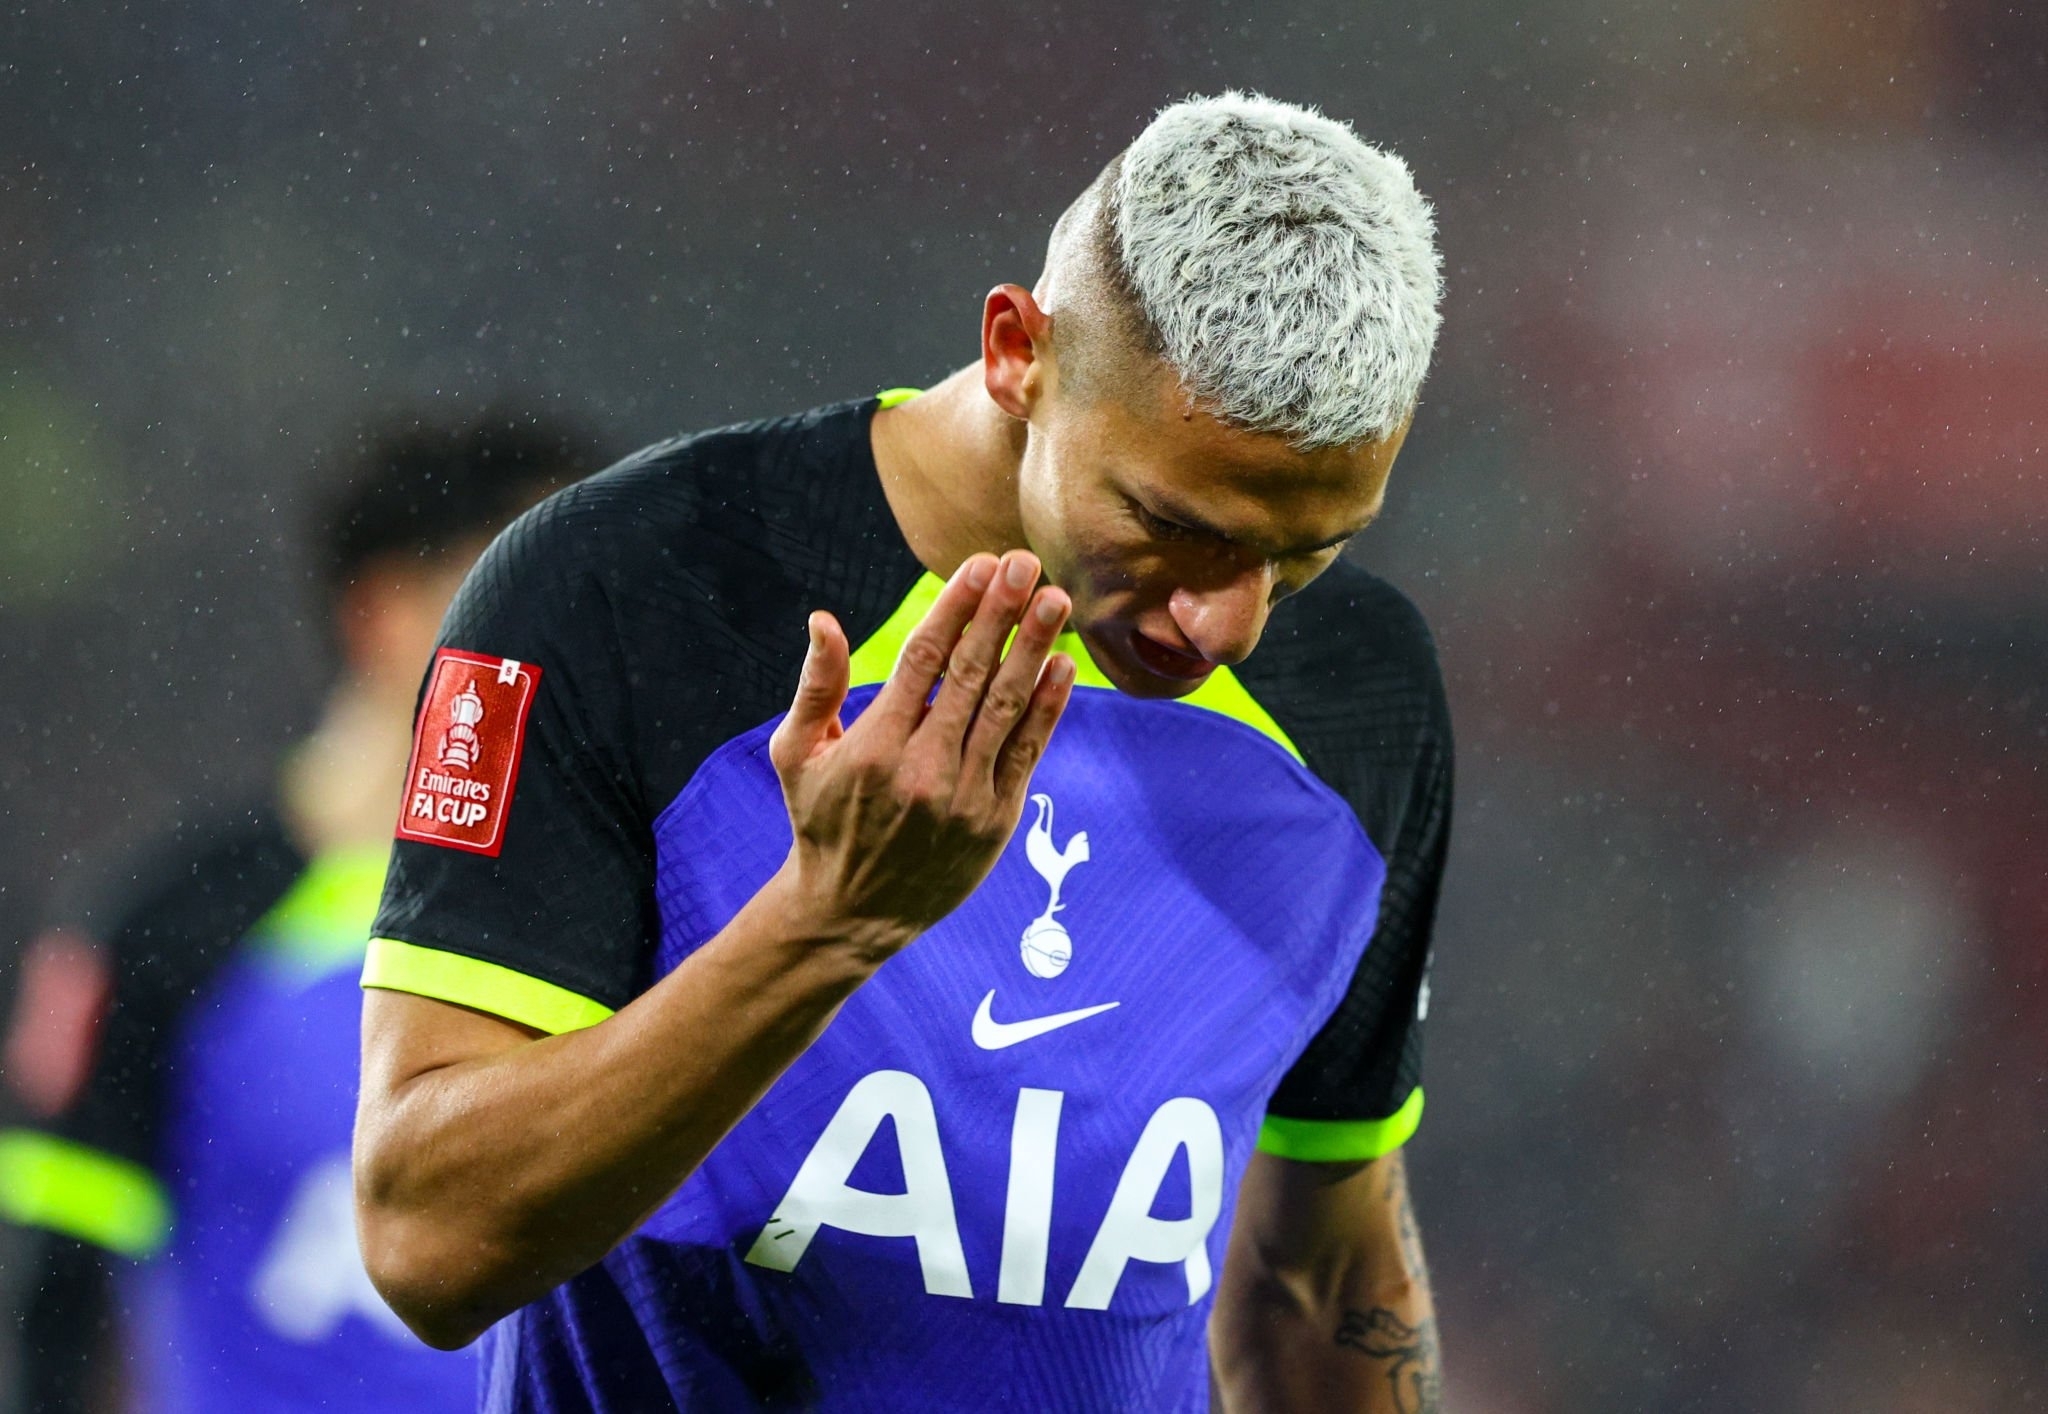 Tottenham star Richarlison has 'been a joke' and is the 'flop of